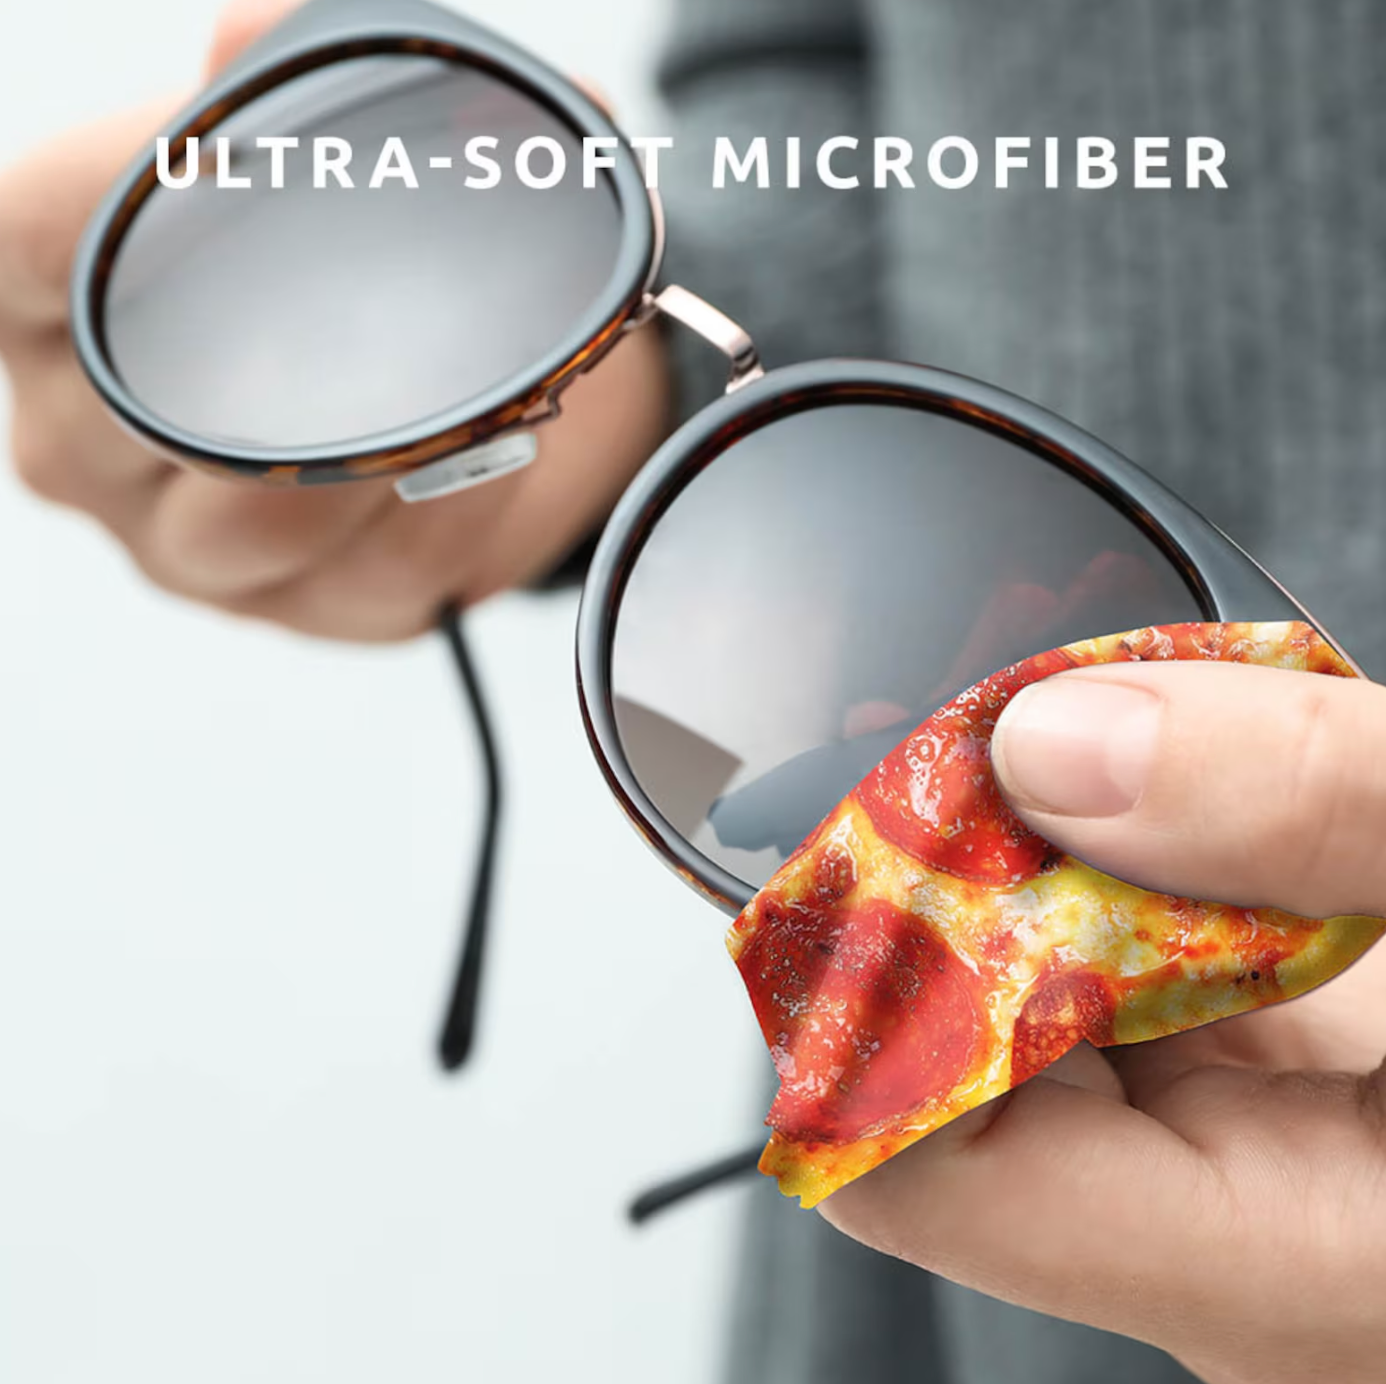 Pizza glasses cleaner cloth